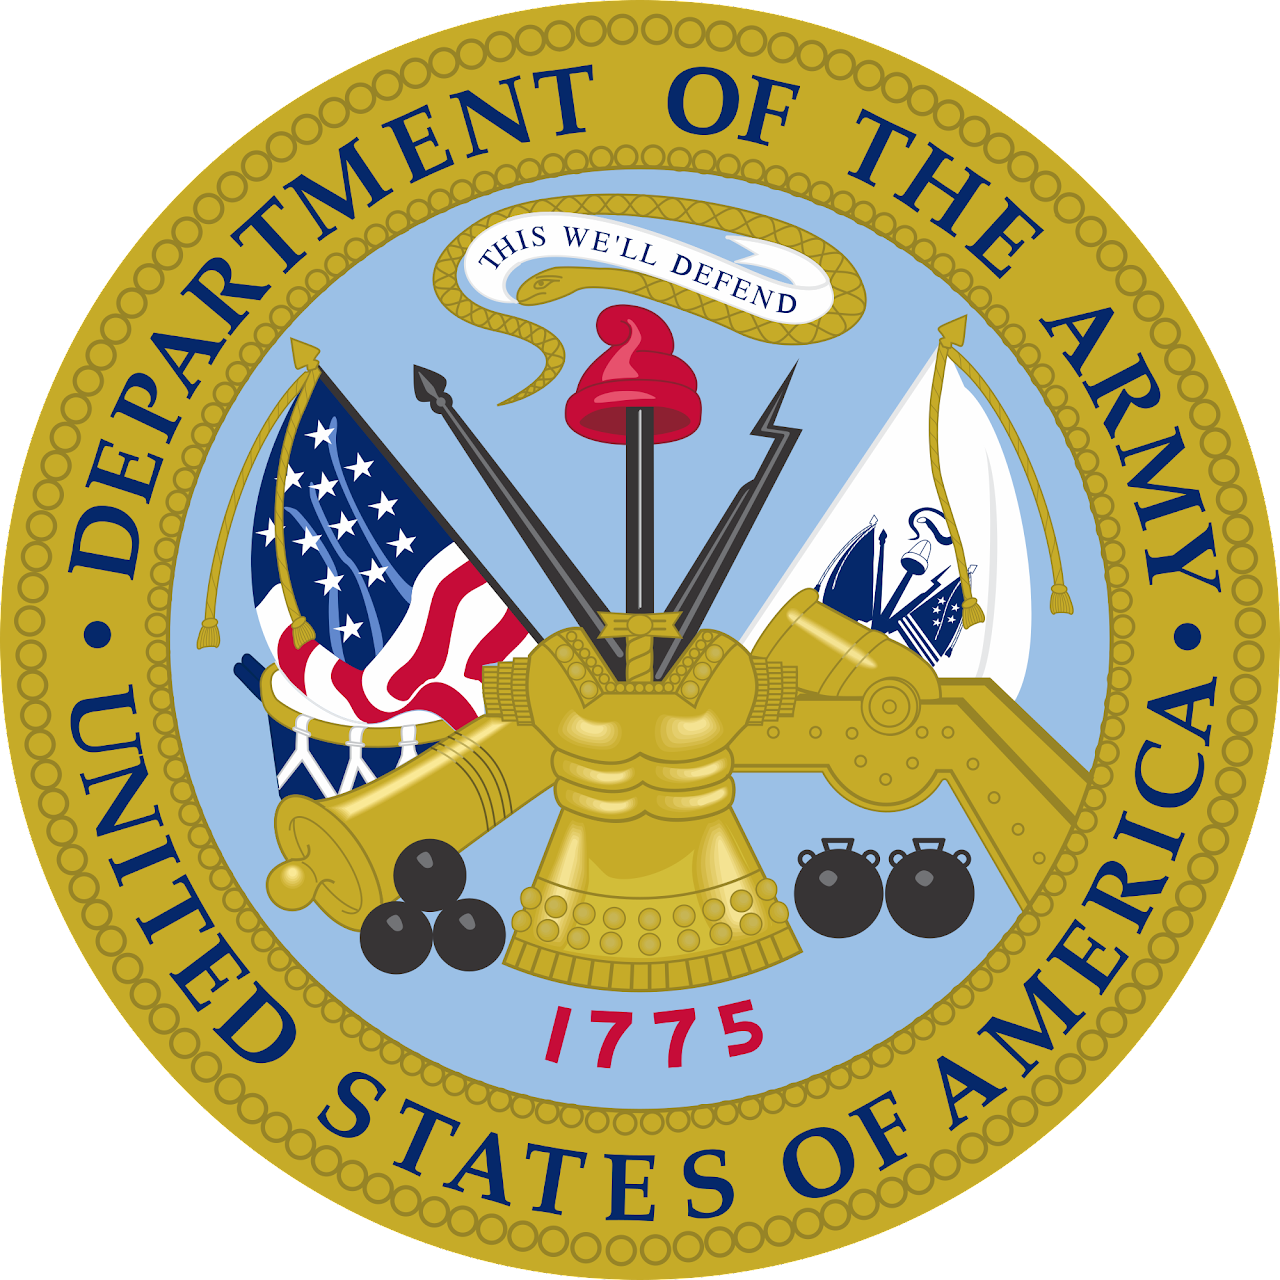 Department of the army united states of america